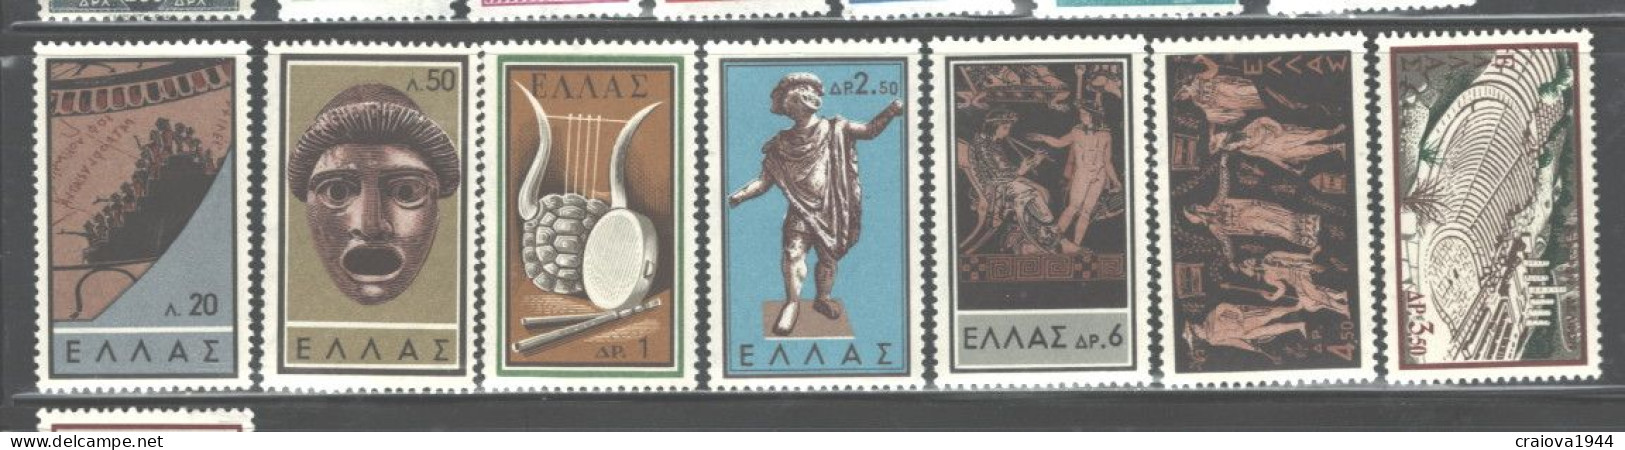 GREECE 1959 "ANCIENT GREEK THEATRE." #649 - 655 MNH - Unused Stamps